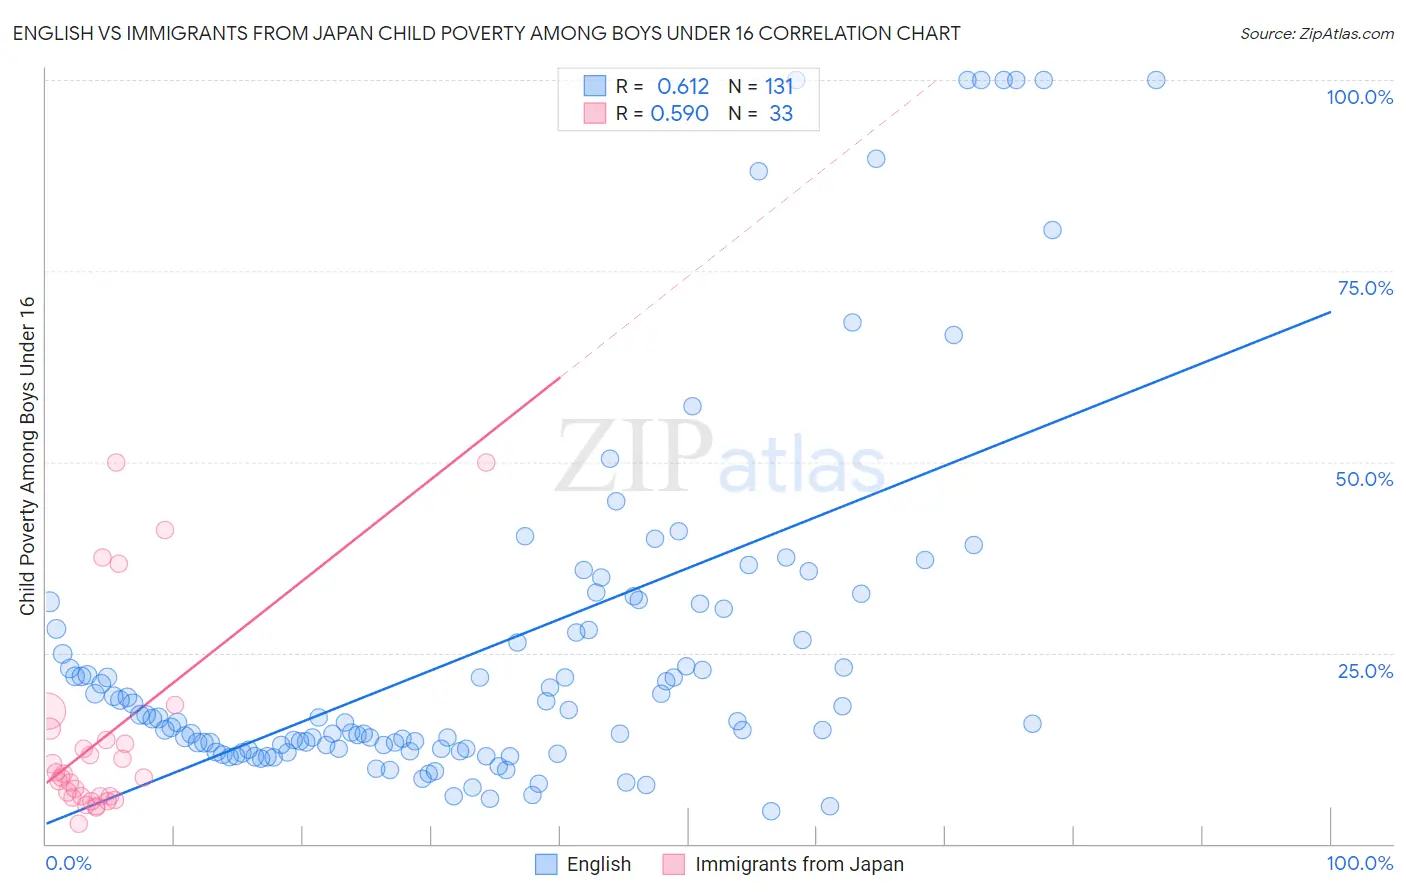 English vs Immigrants from Japan Child Poverty Among Boys Under 16